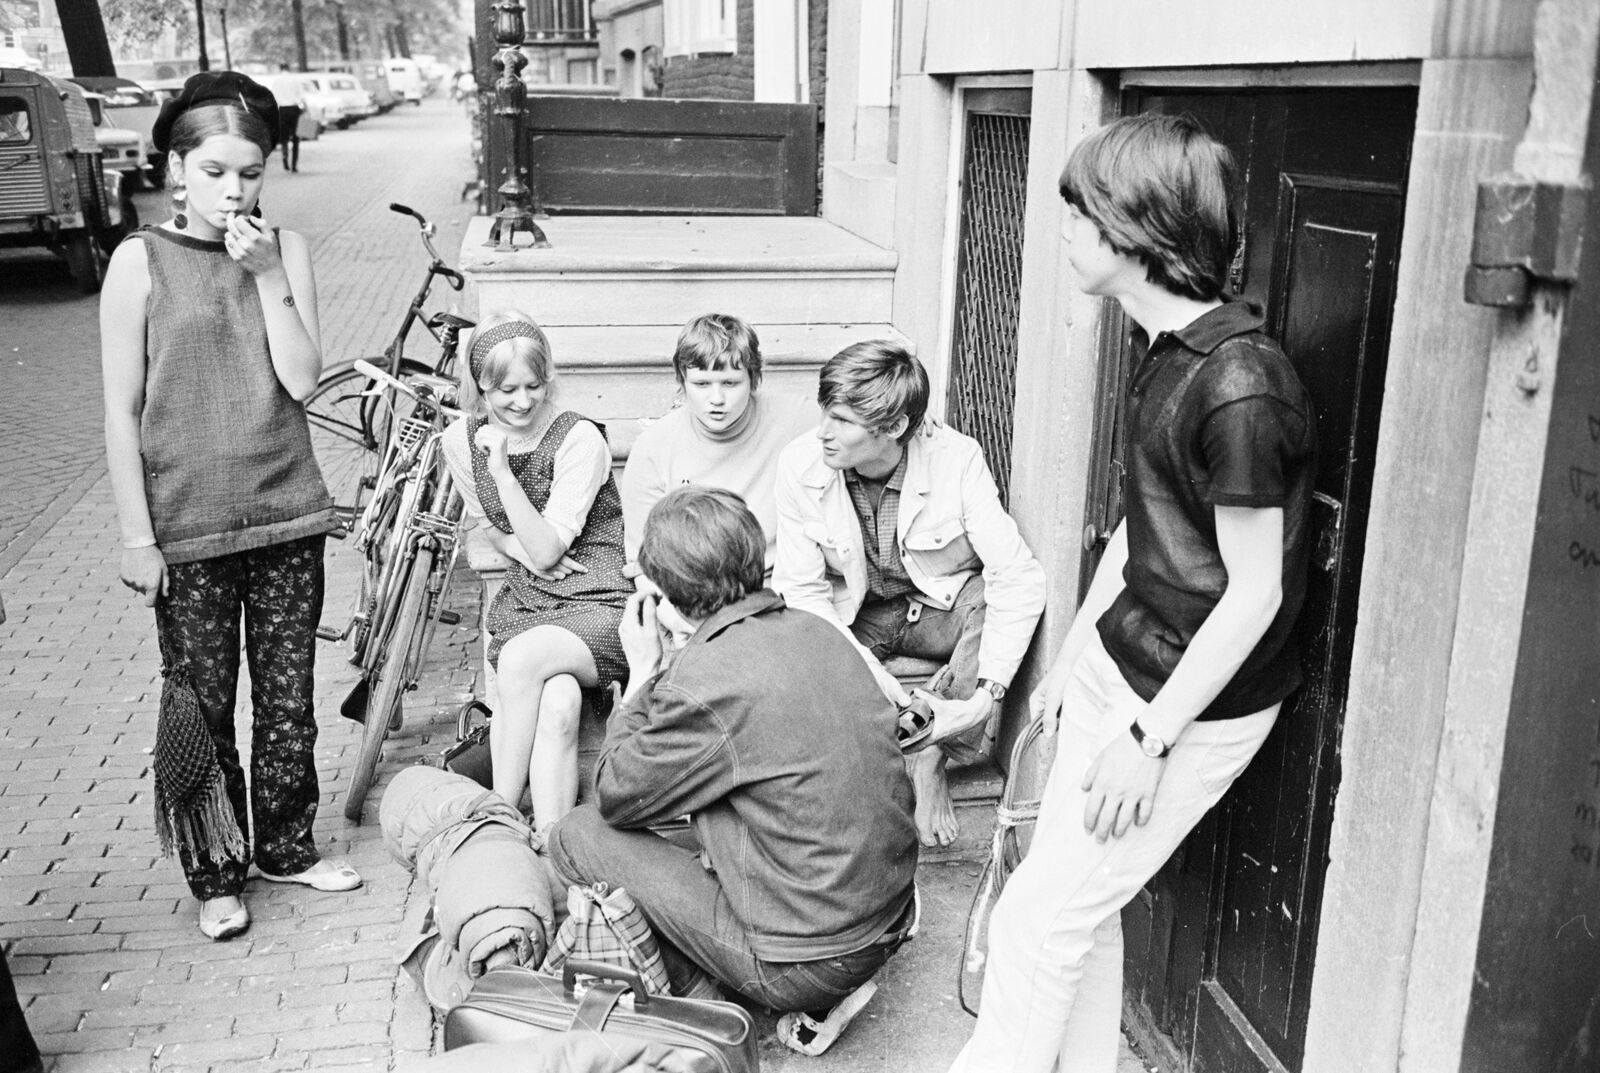 Members of the counterculture group Provo gather in Amsterdam in&nbsp;1966. The group launched a free bikesharing program called the White Bicycle Plan that’s considered the forerunner of today’s municipal fleets.